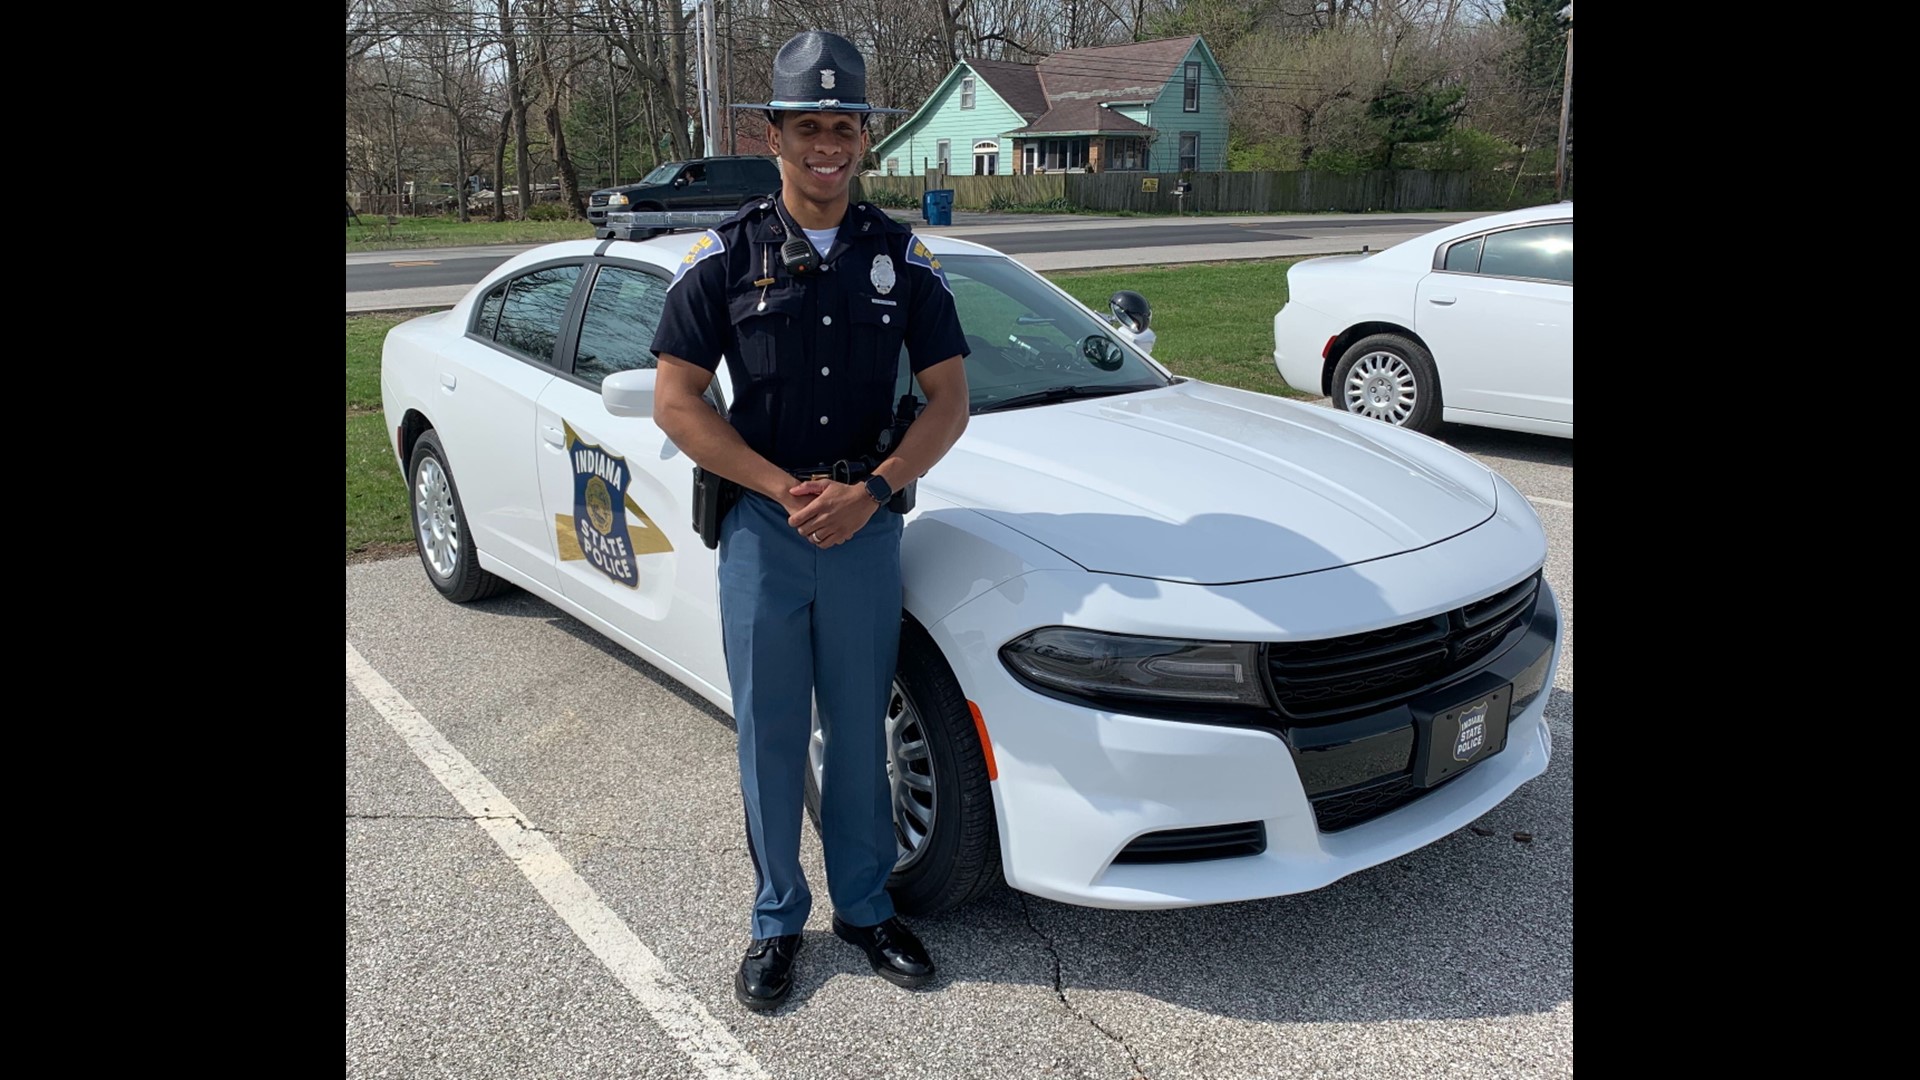 New Indiana State Police troopers begin solo patrols amidst pandemic